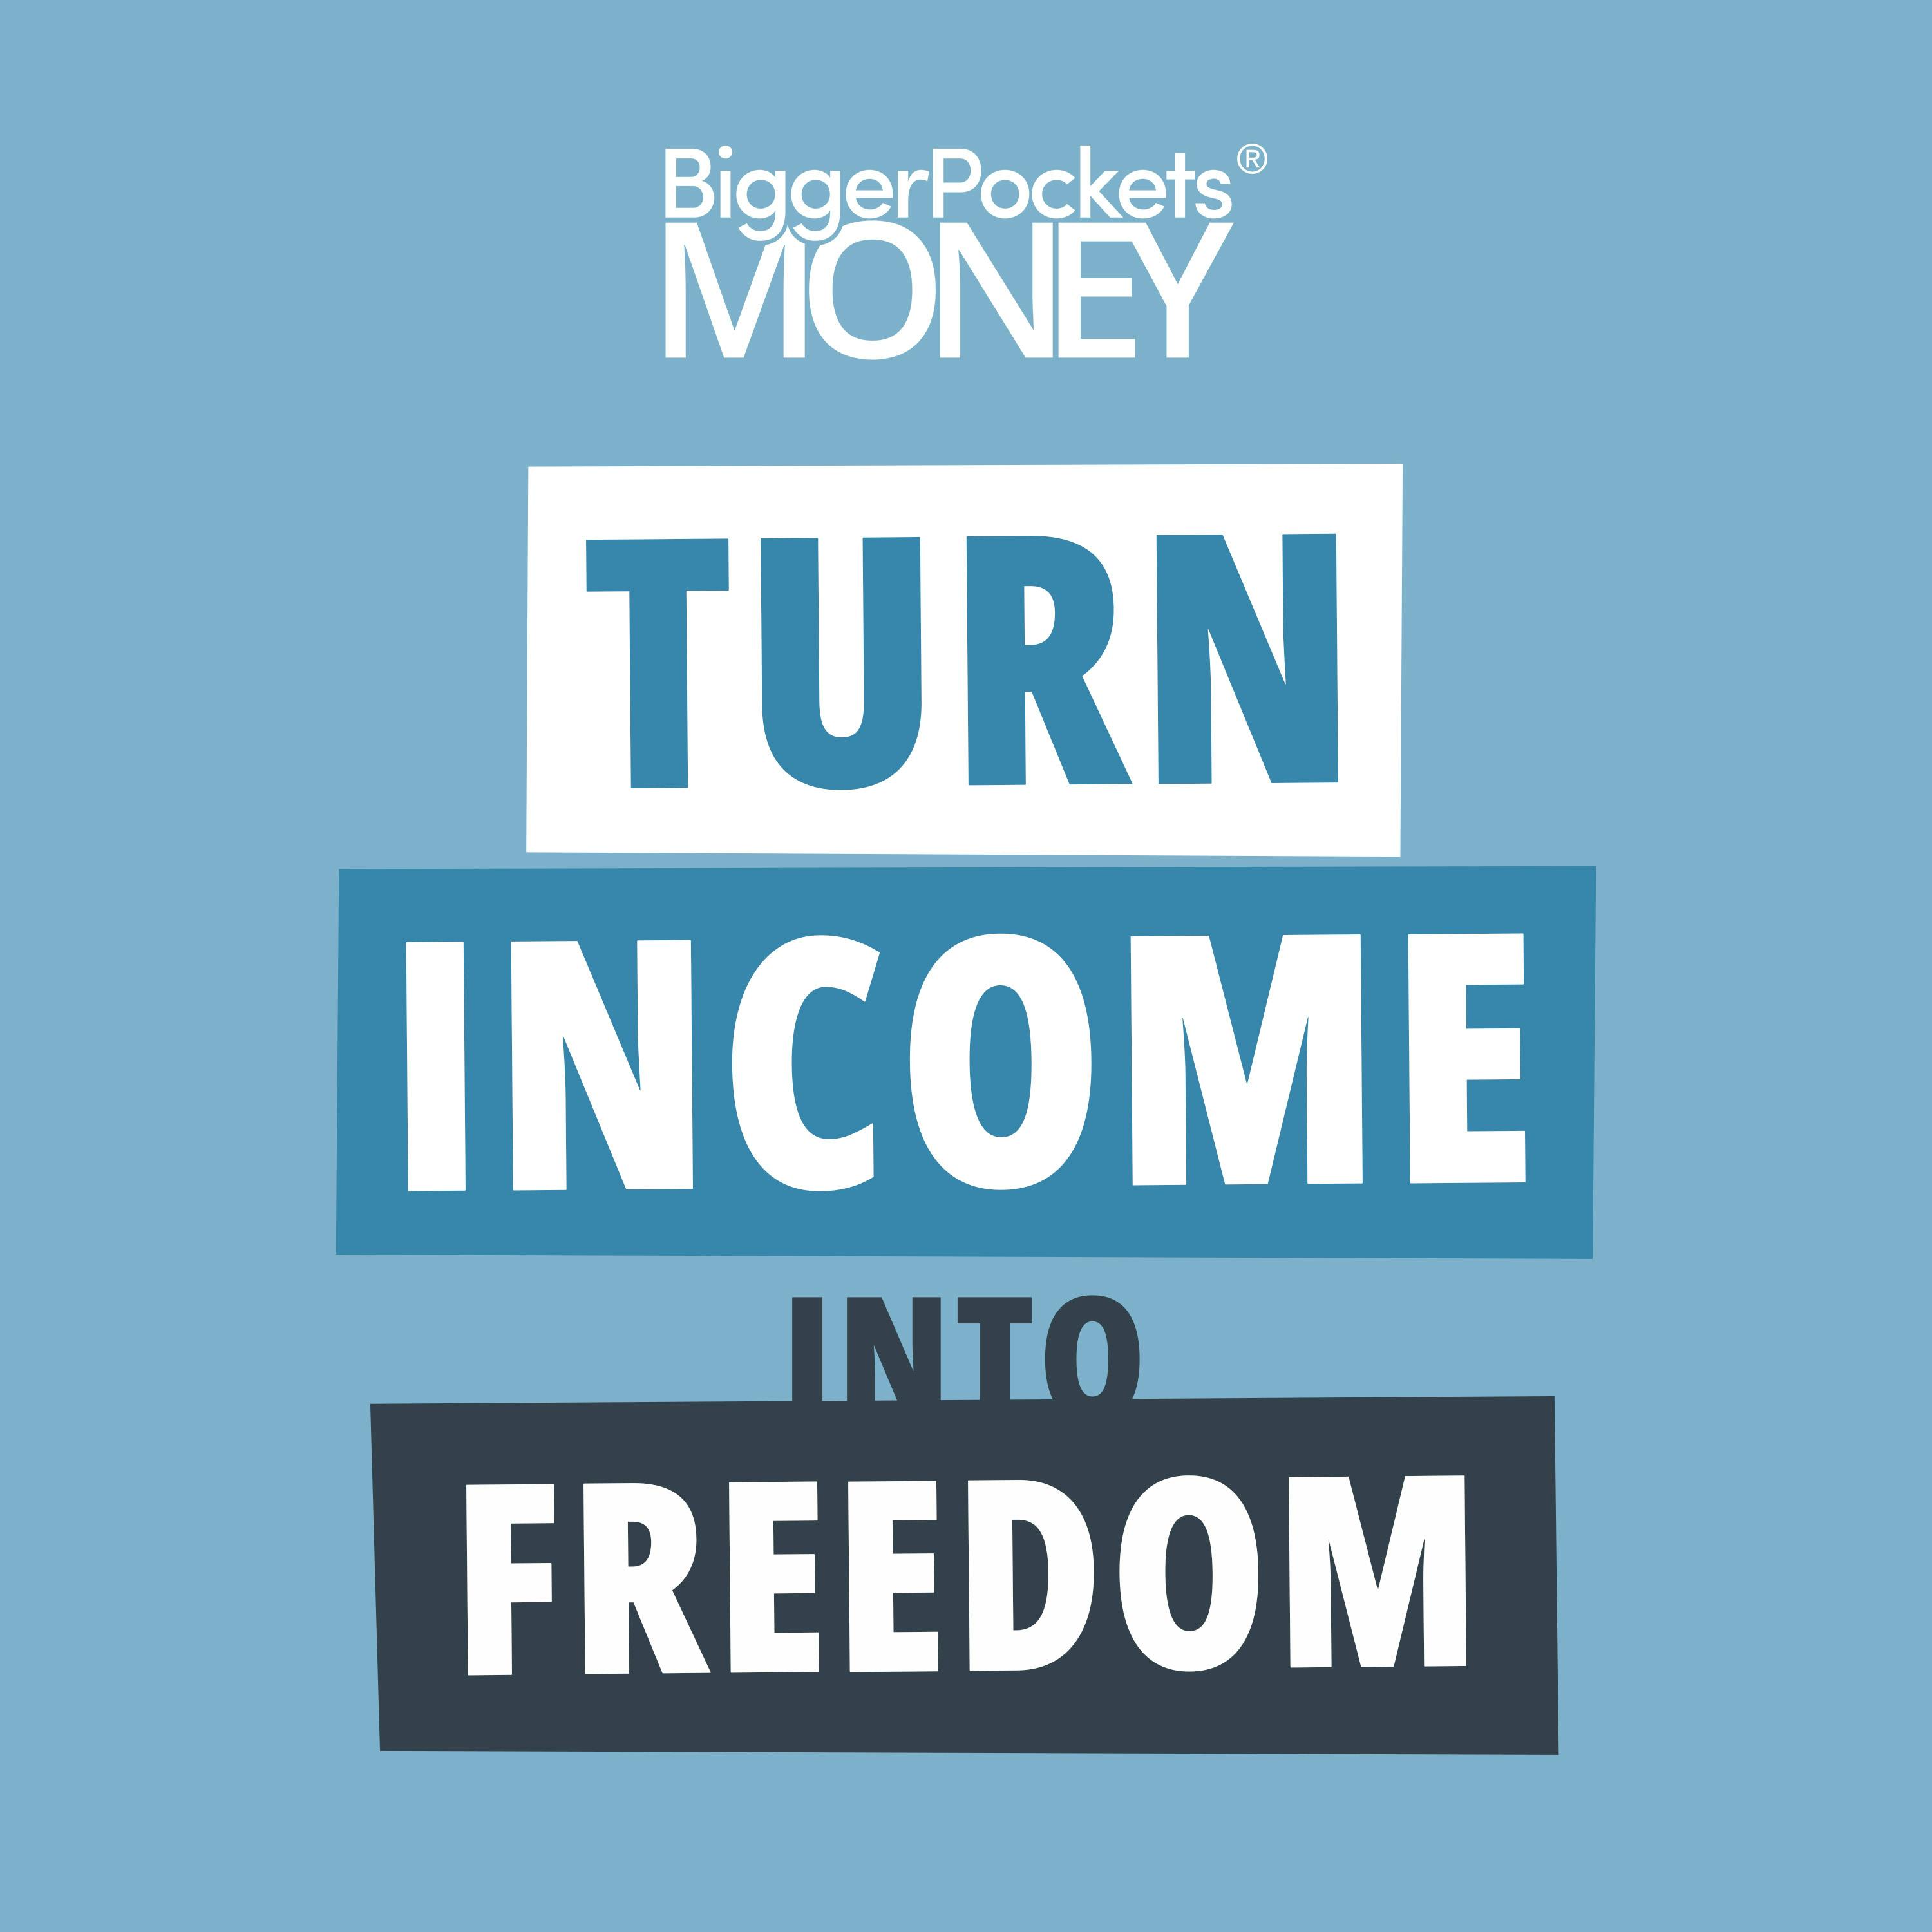 396: The Investments That Will Give You COMPLETE Time Freedom